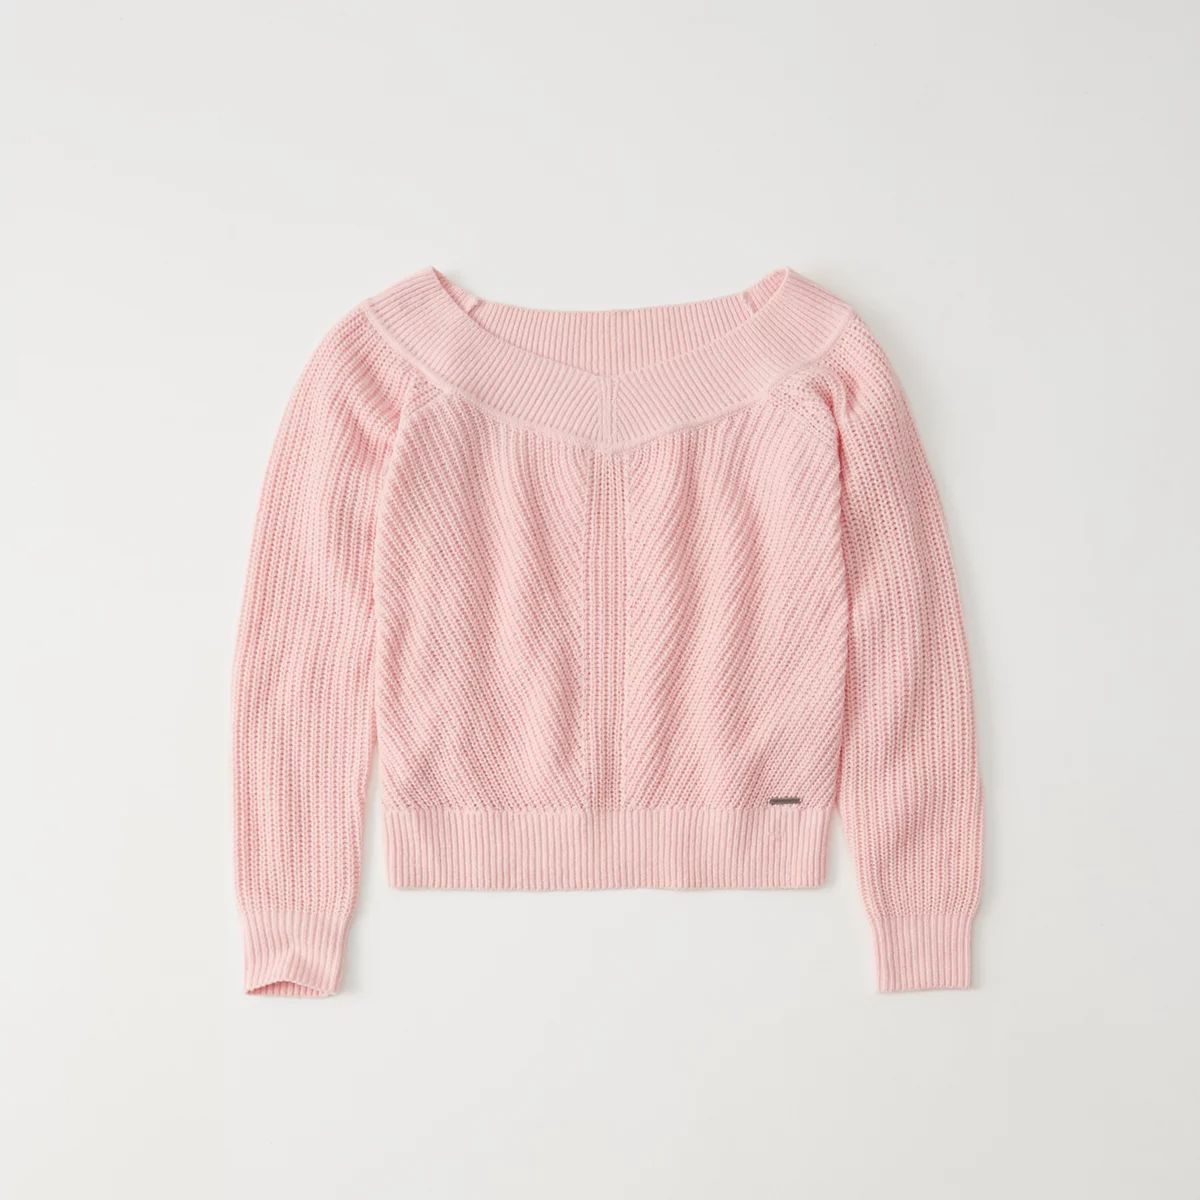 The A&F Off-The-Shoulder Sweater | Abercrombie & Fitch US & UK